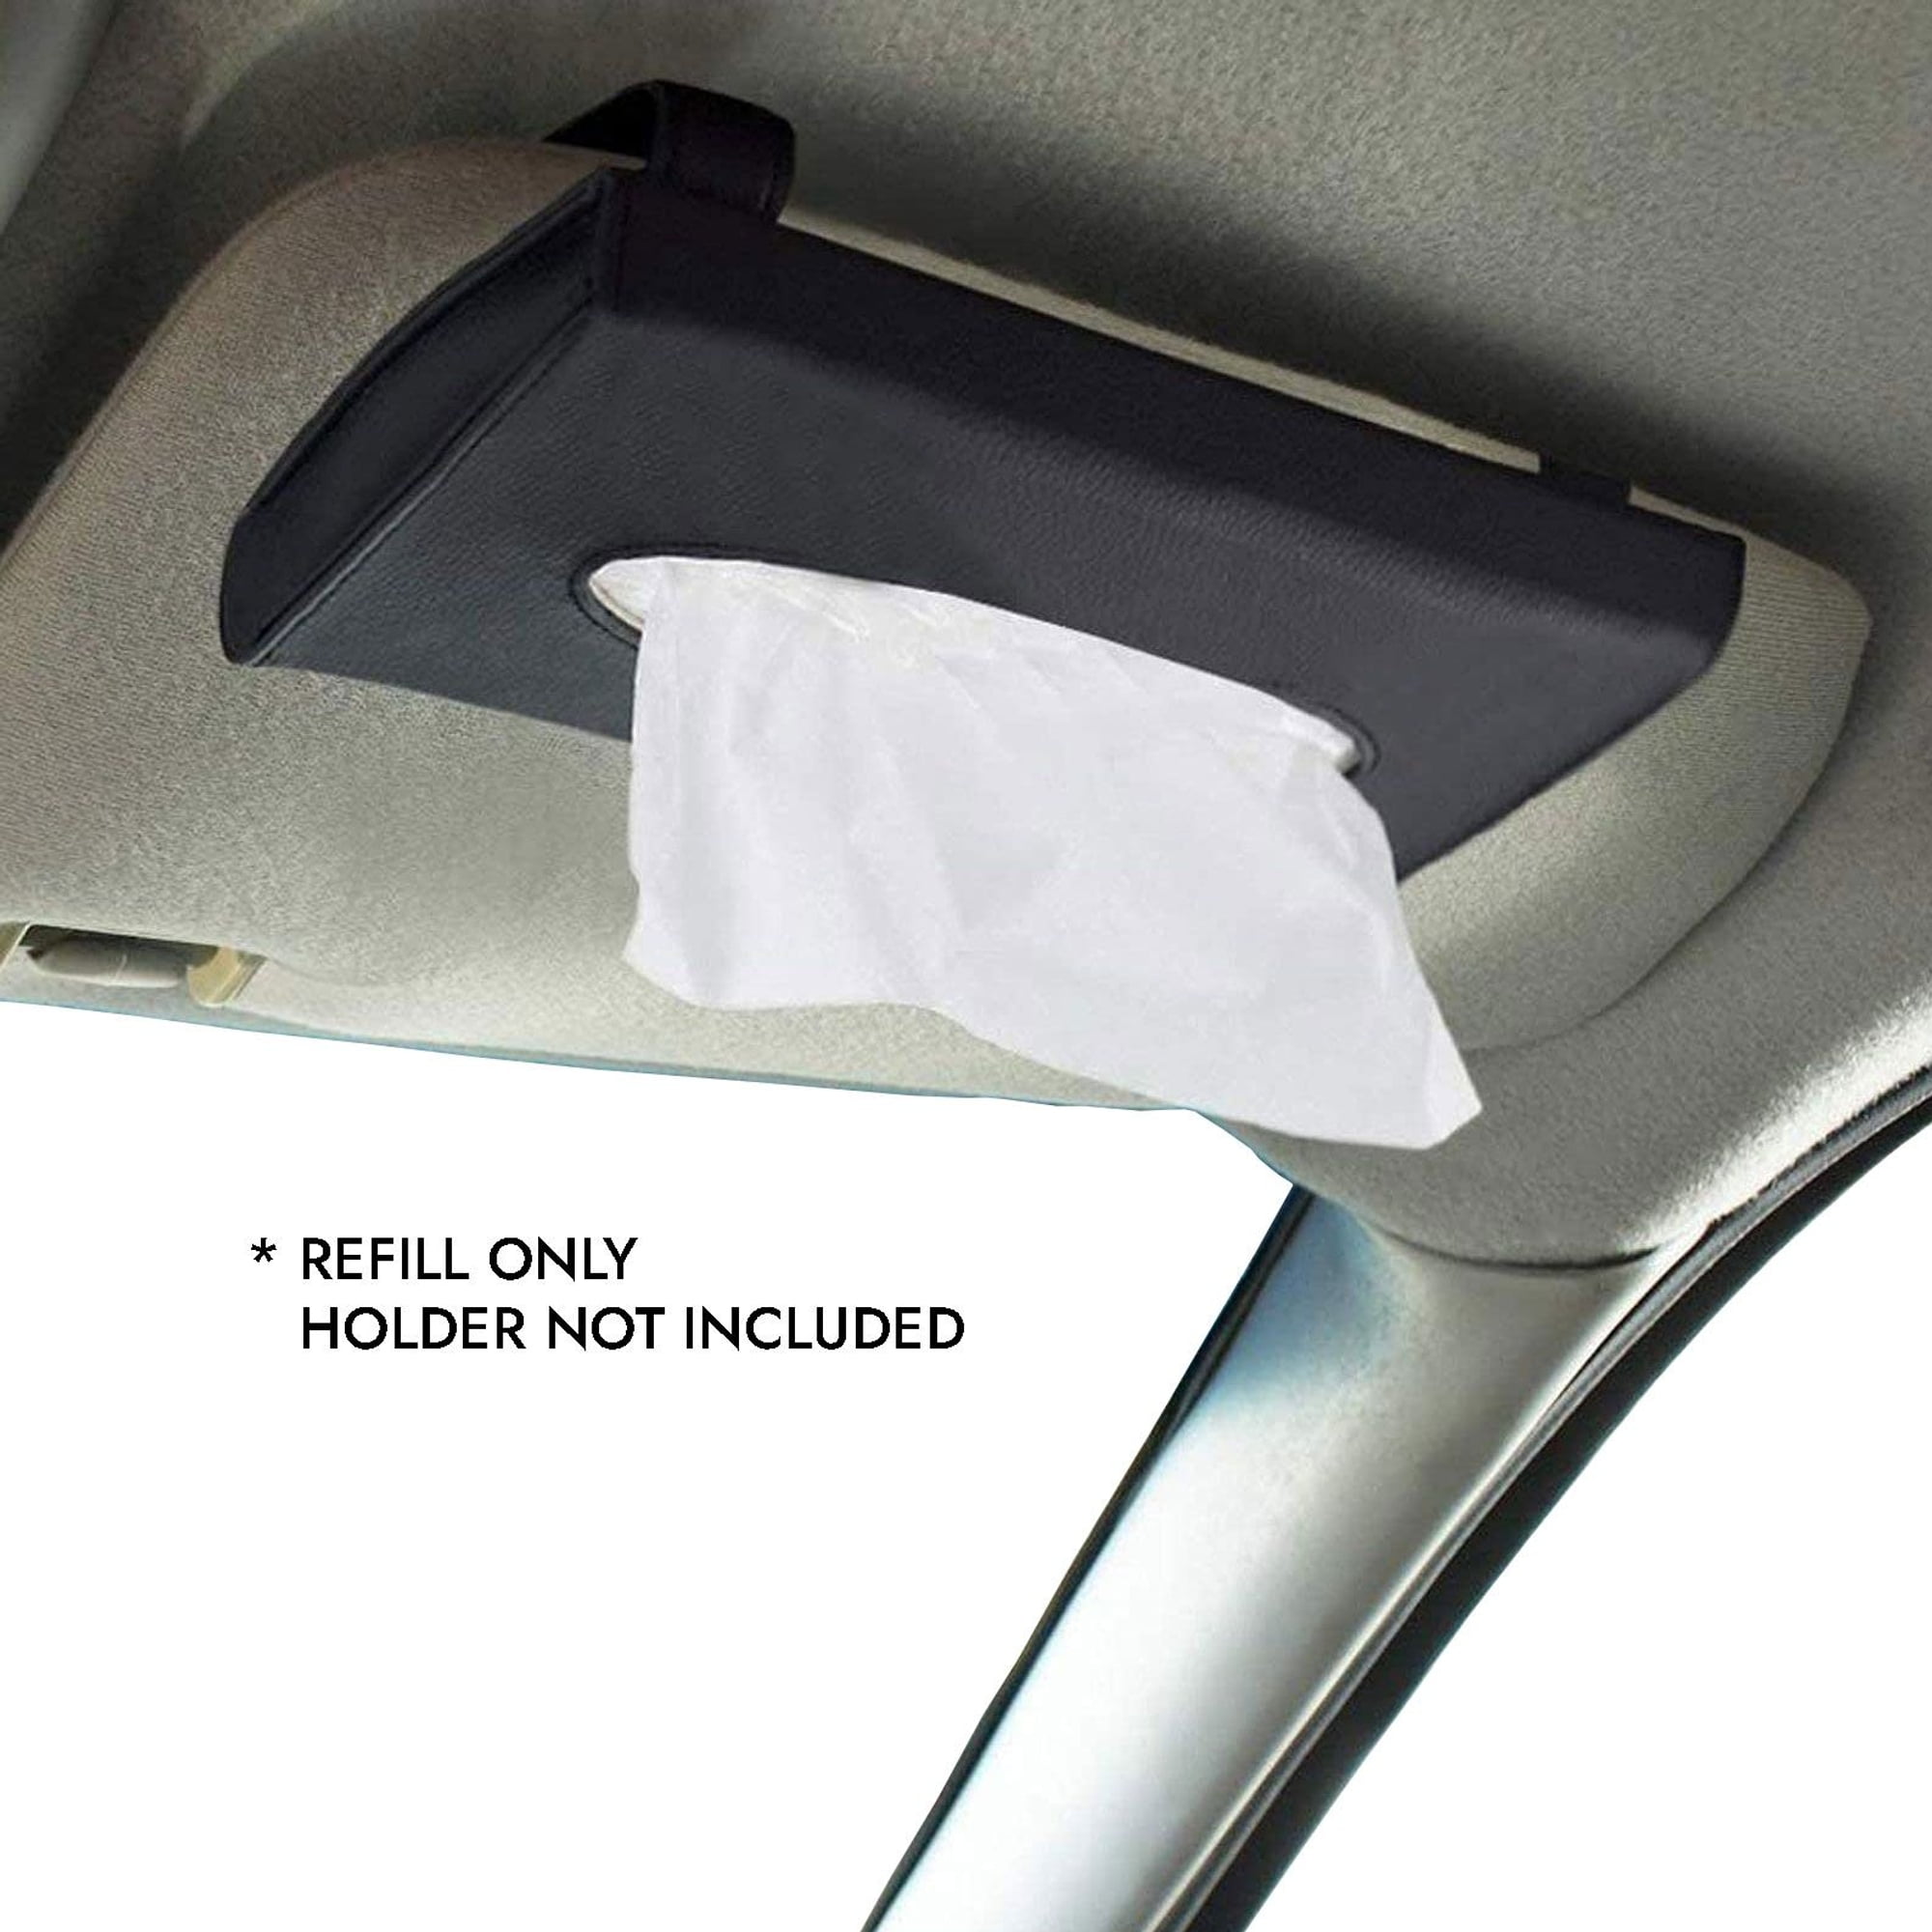 Car Tissue Refill, 18 Packs Car Tissues Auto Visor Tissue Refills for  Visor, Napkin Holder Refill, Car Travel Tissues, Soft and Smooth, 540 Sheets